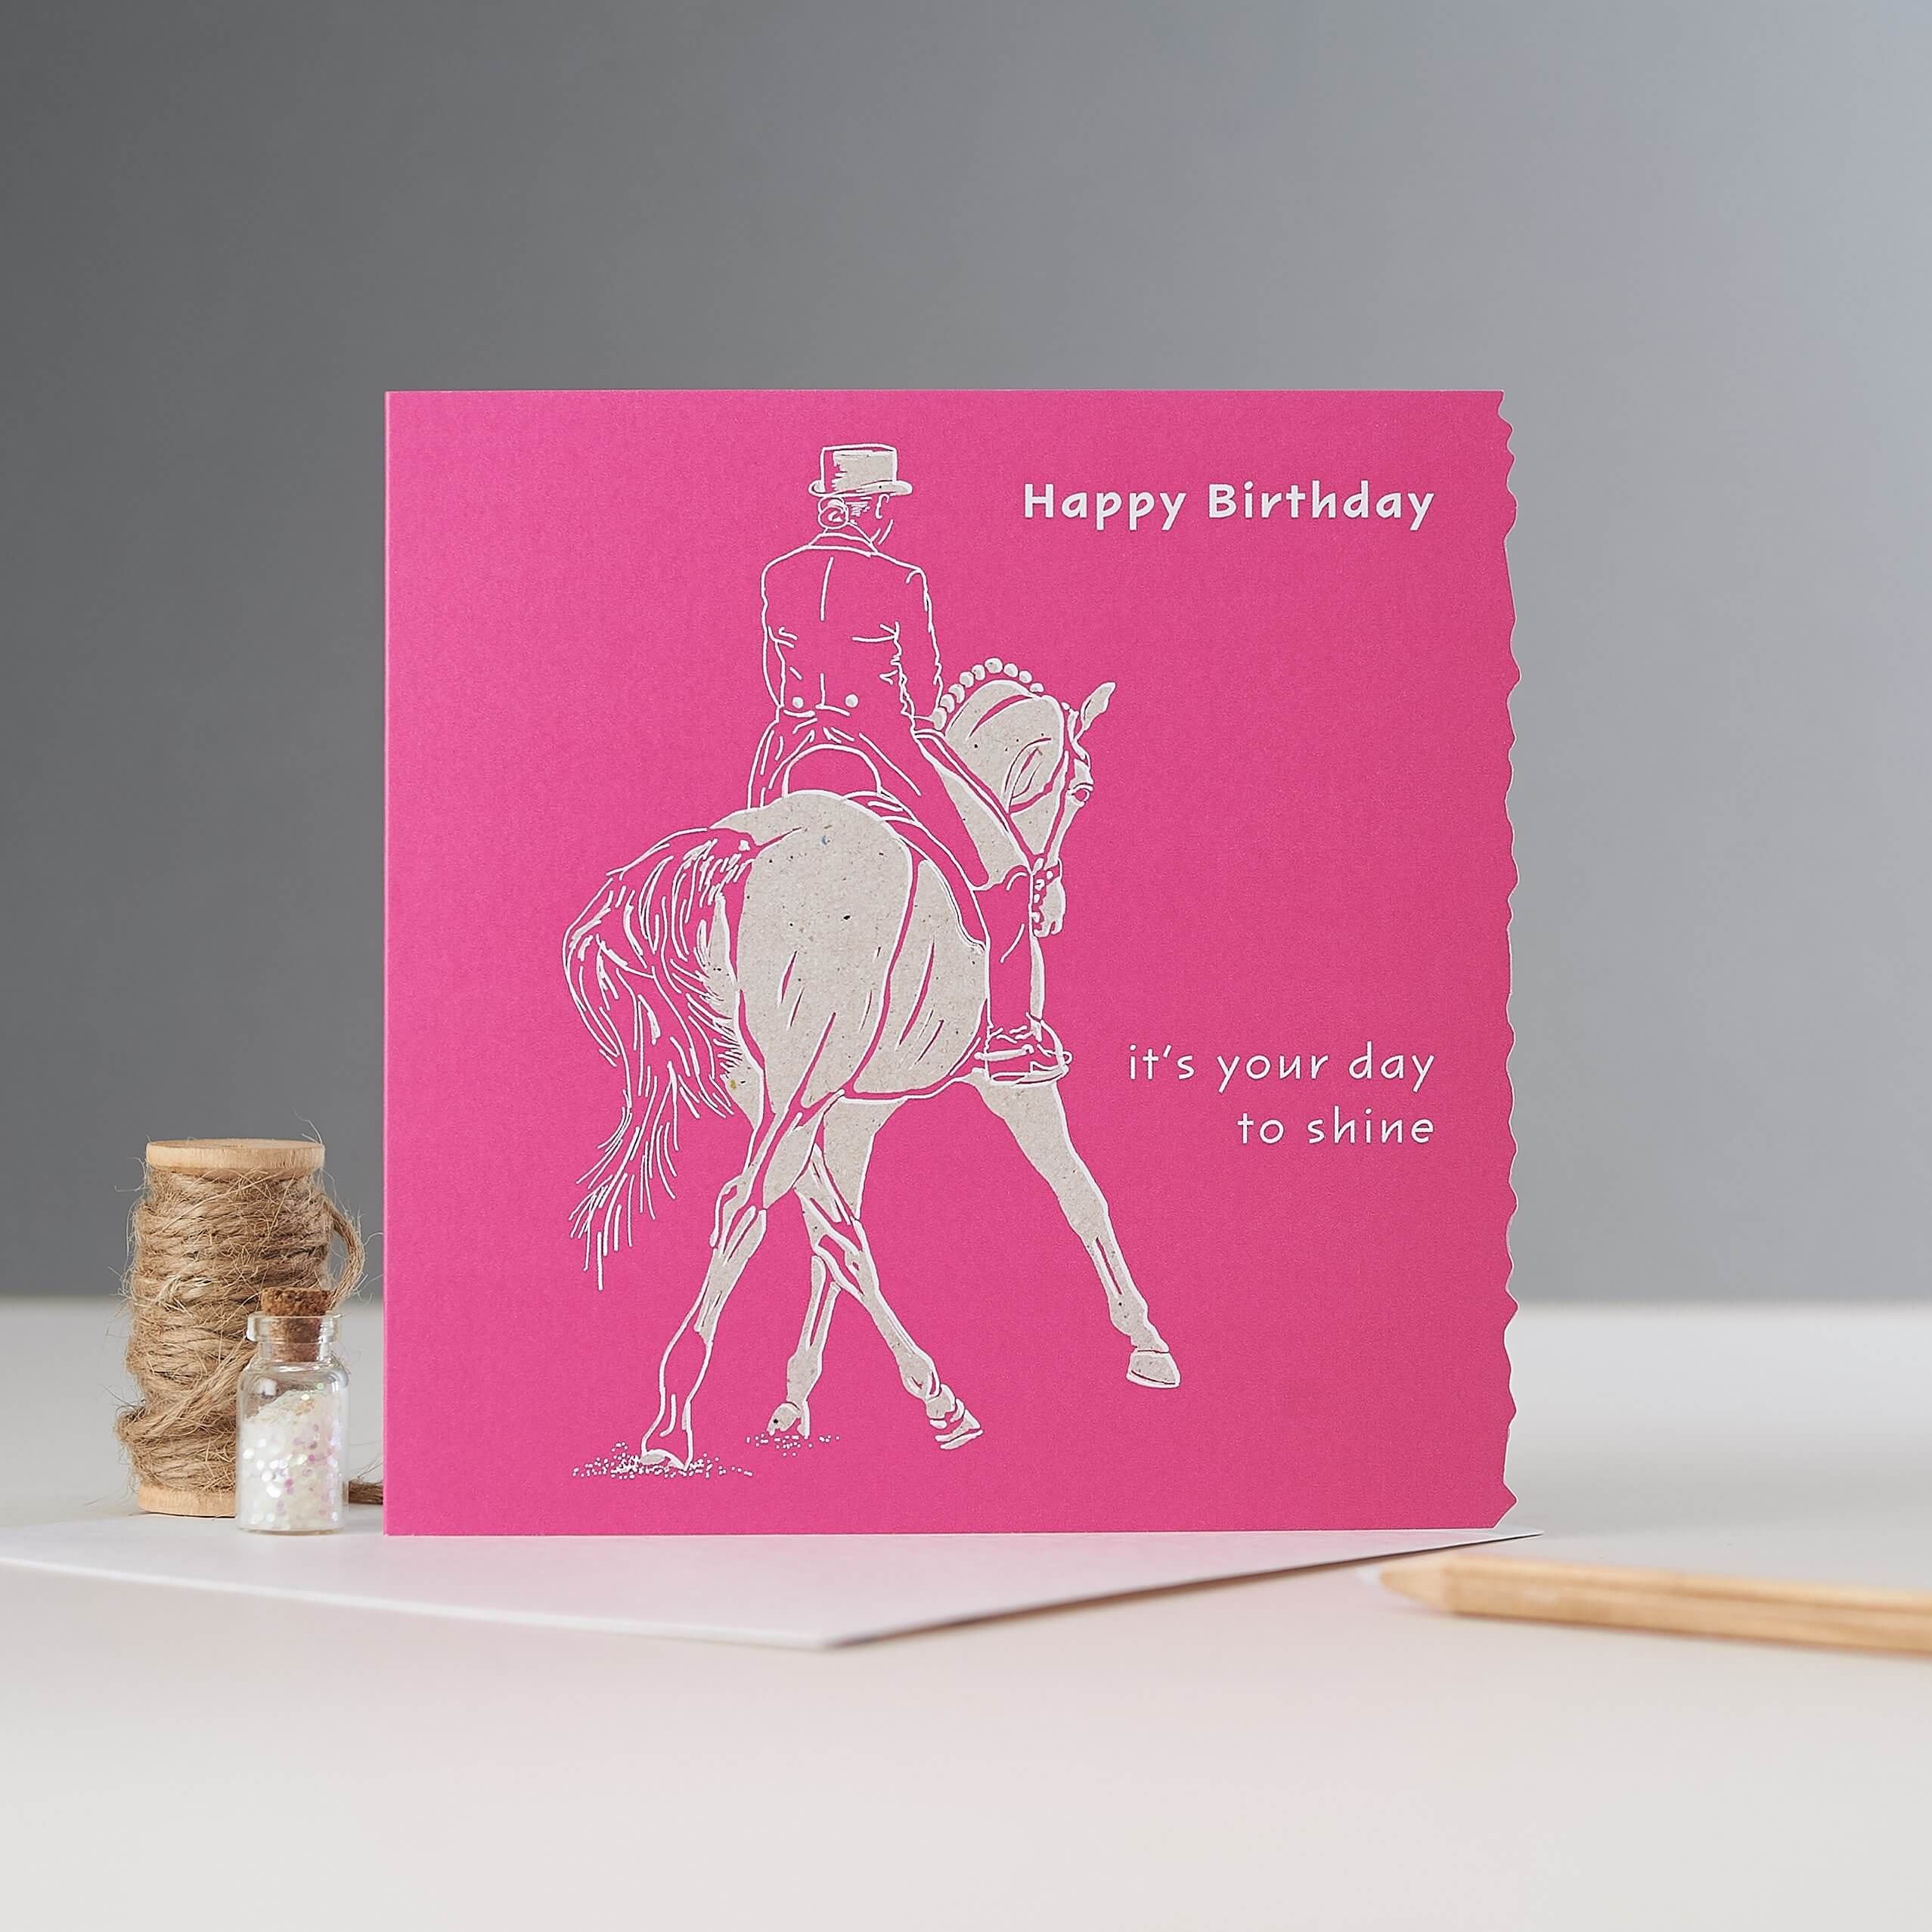 Happy Birthday It's Your Day To Shine! greeting card